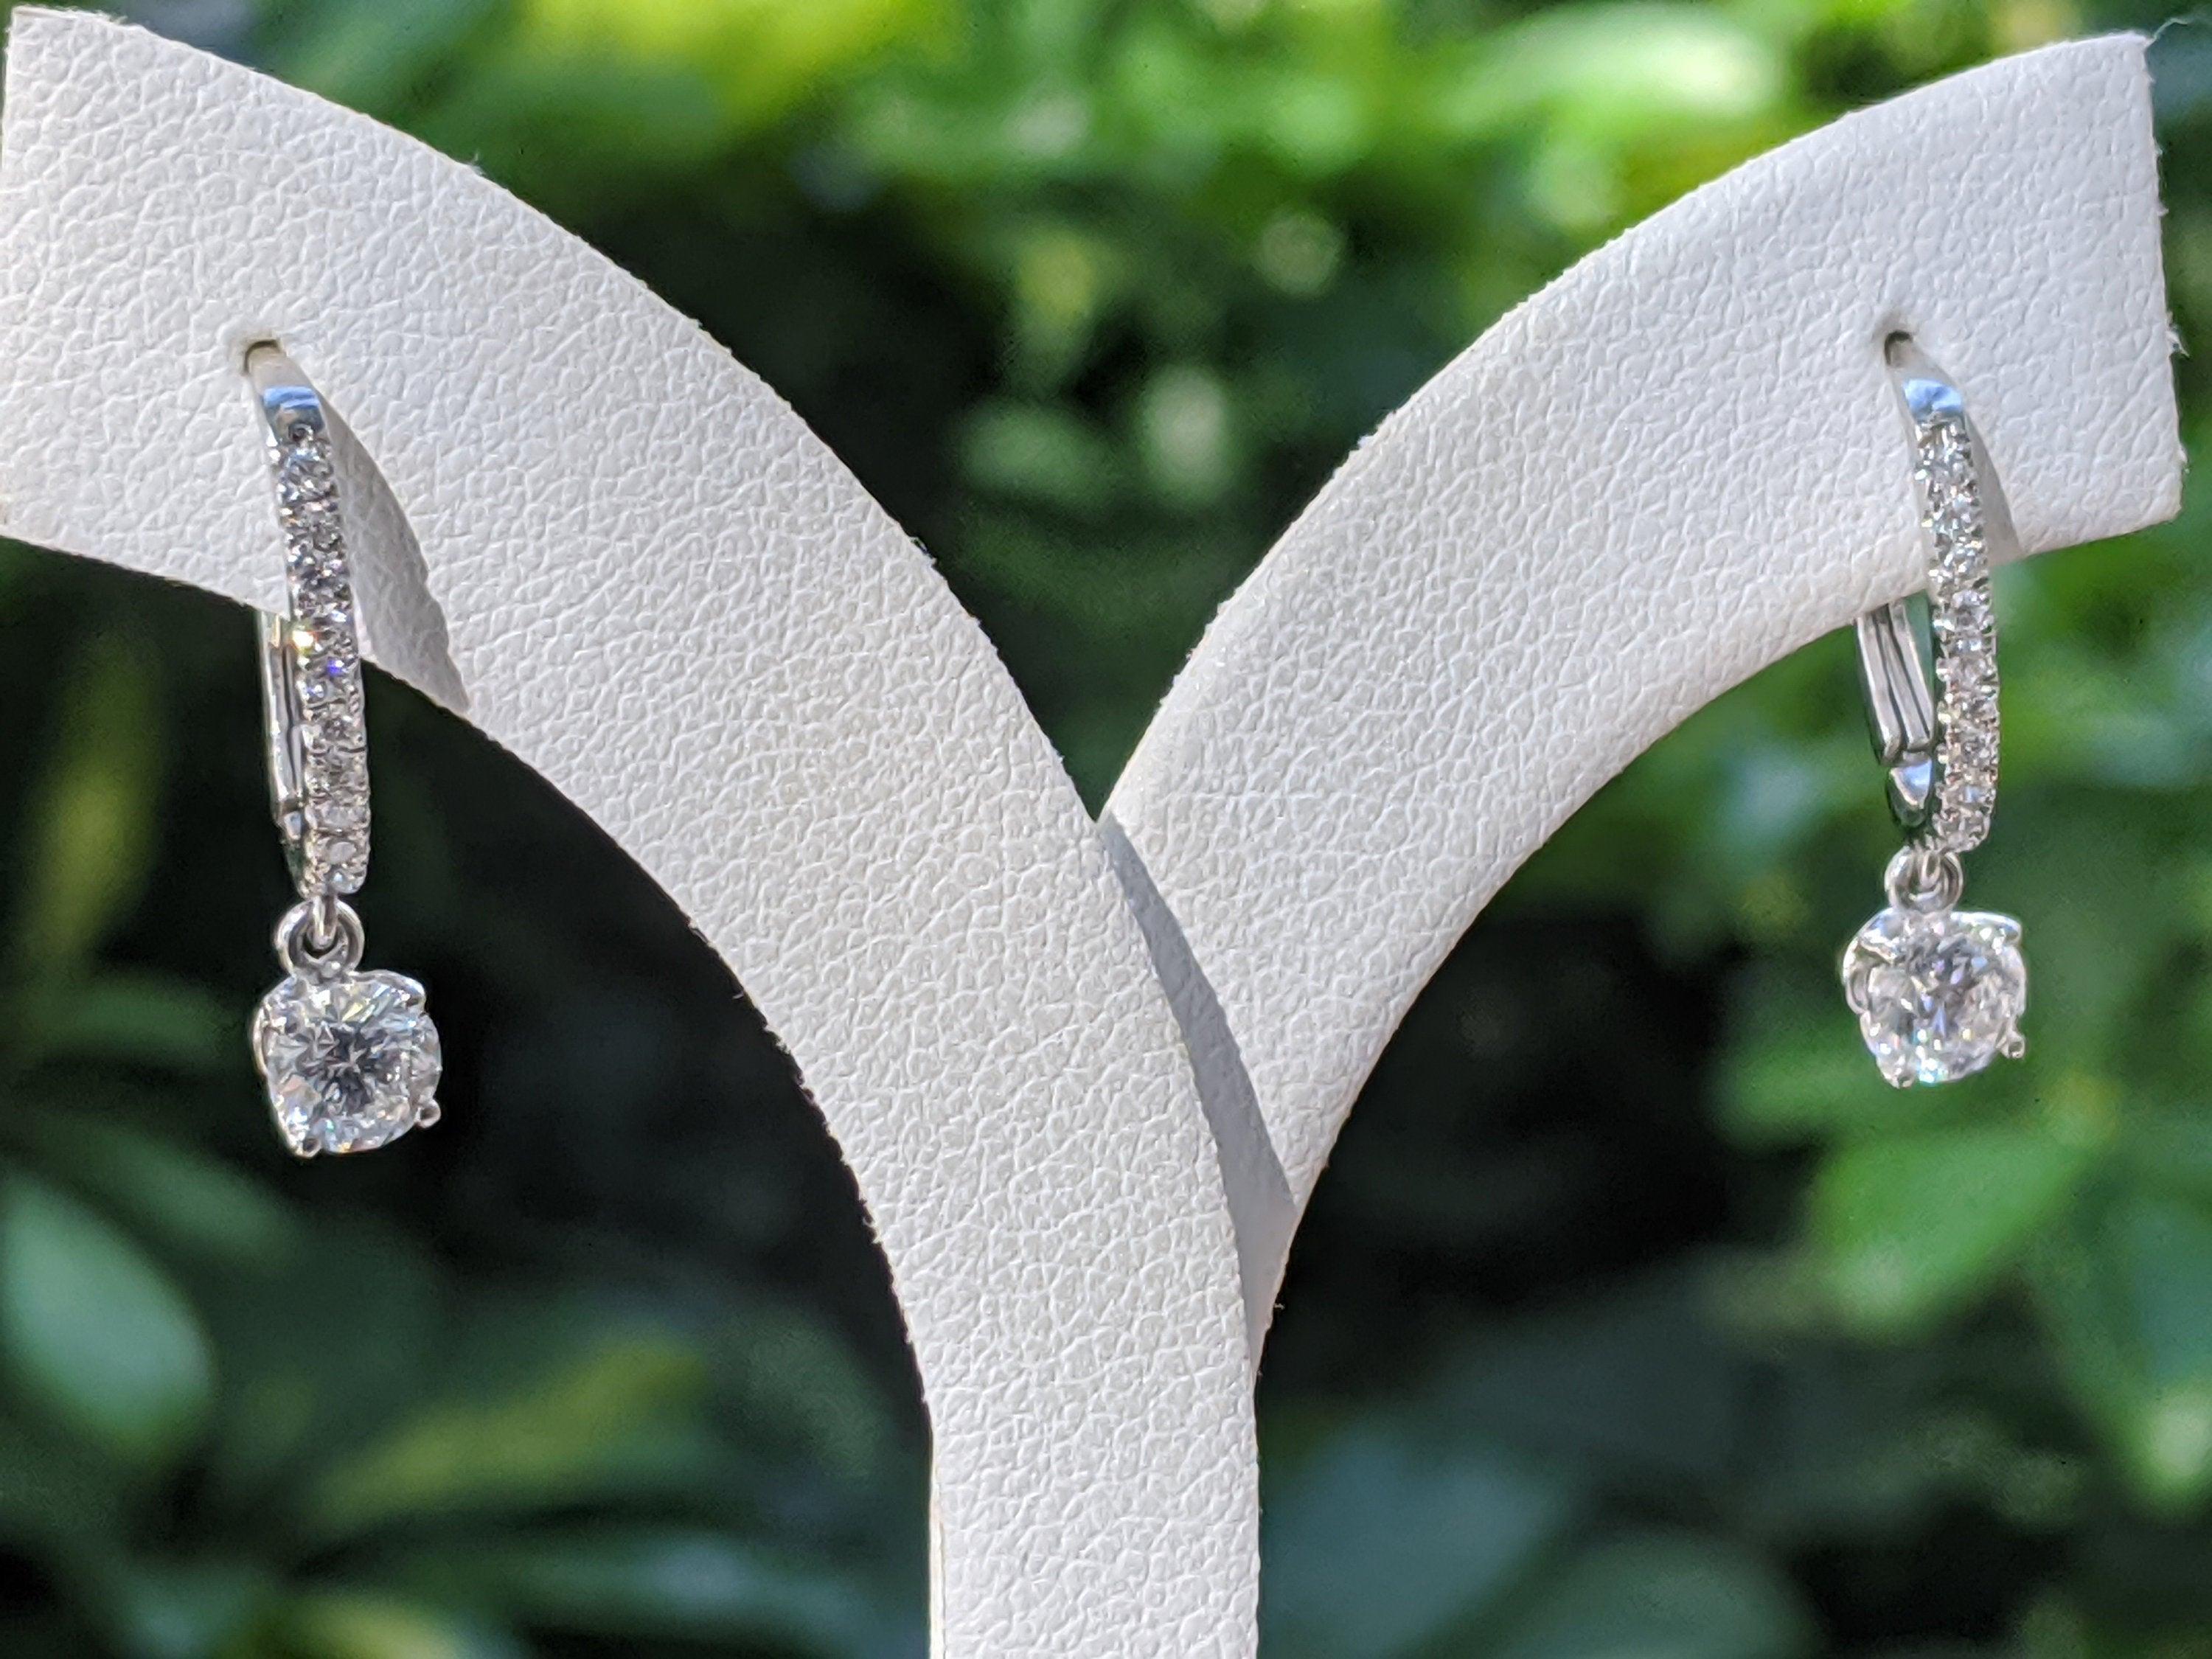 A classic solitaire diamond dangle earrings made of 14K white gold set with a pair of excellent round cut diamonds of SI1 clarity and F color.
 The total carat weight of these Diamond drop earrings is 1.00 carat.
 
 Center Stone:
 Carat Weight: 0.40